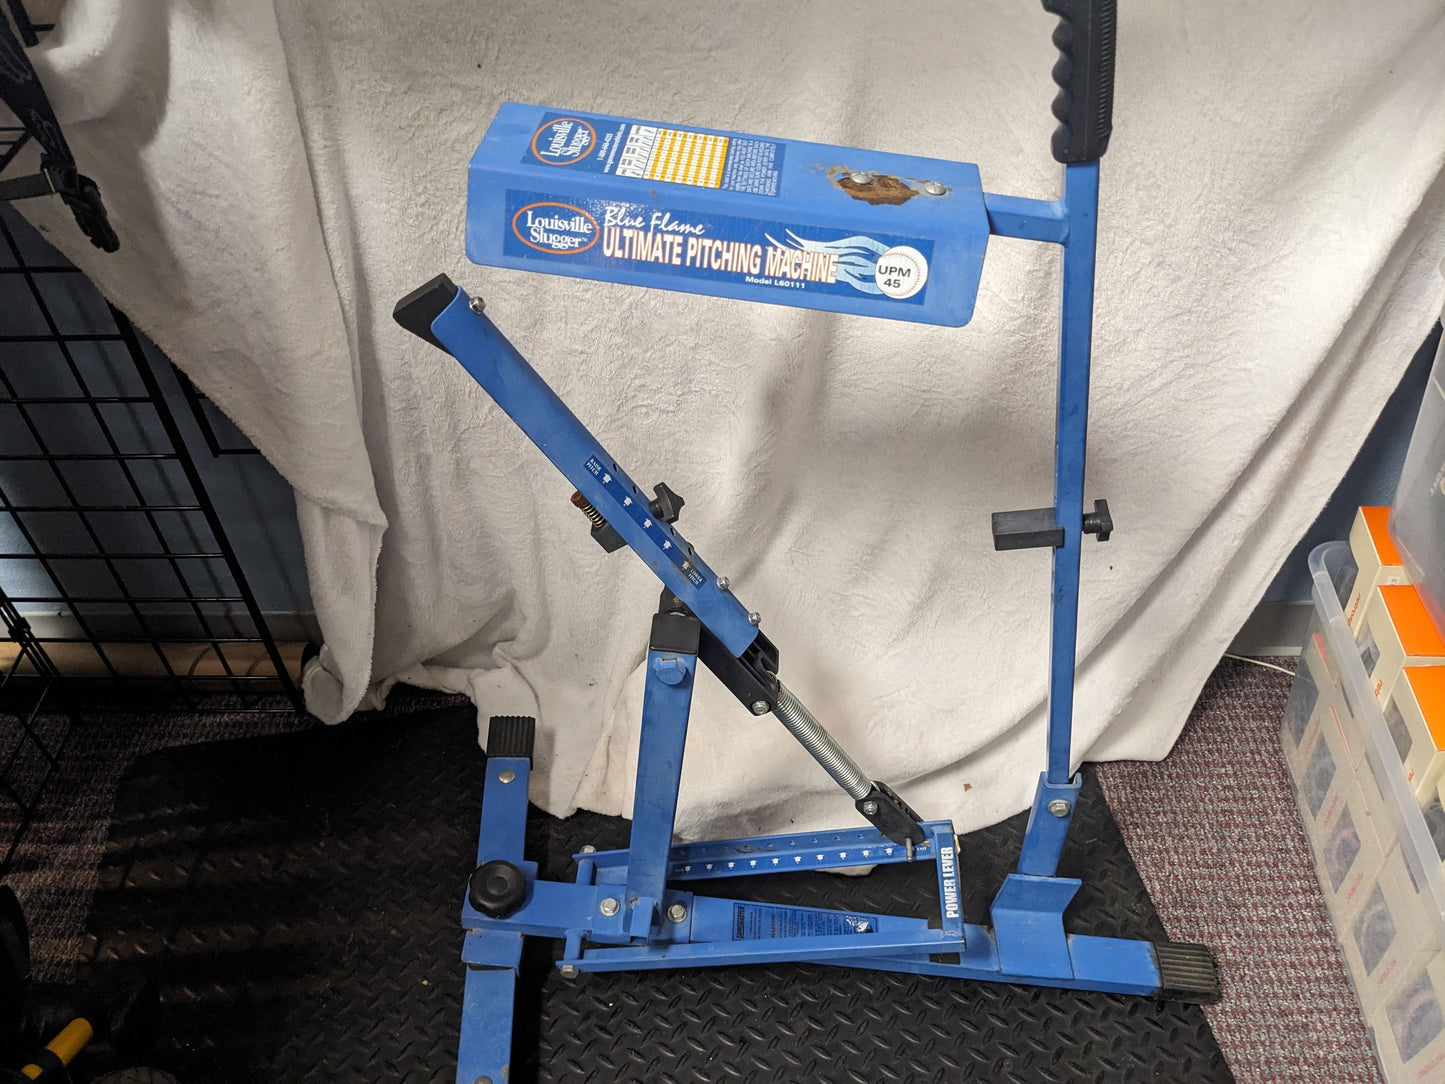 Louisville Slugger Blue Flame Pitching Machine Size N/A Color Blue Condition Used